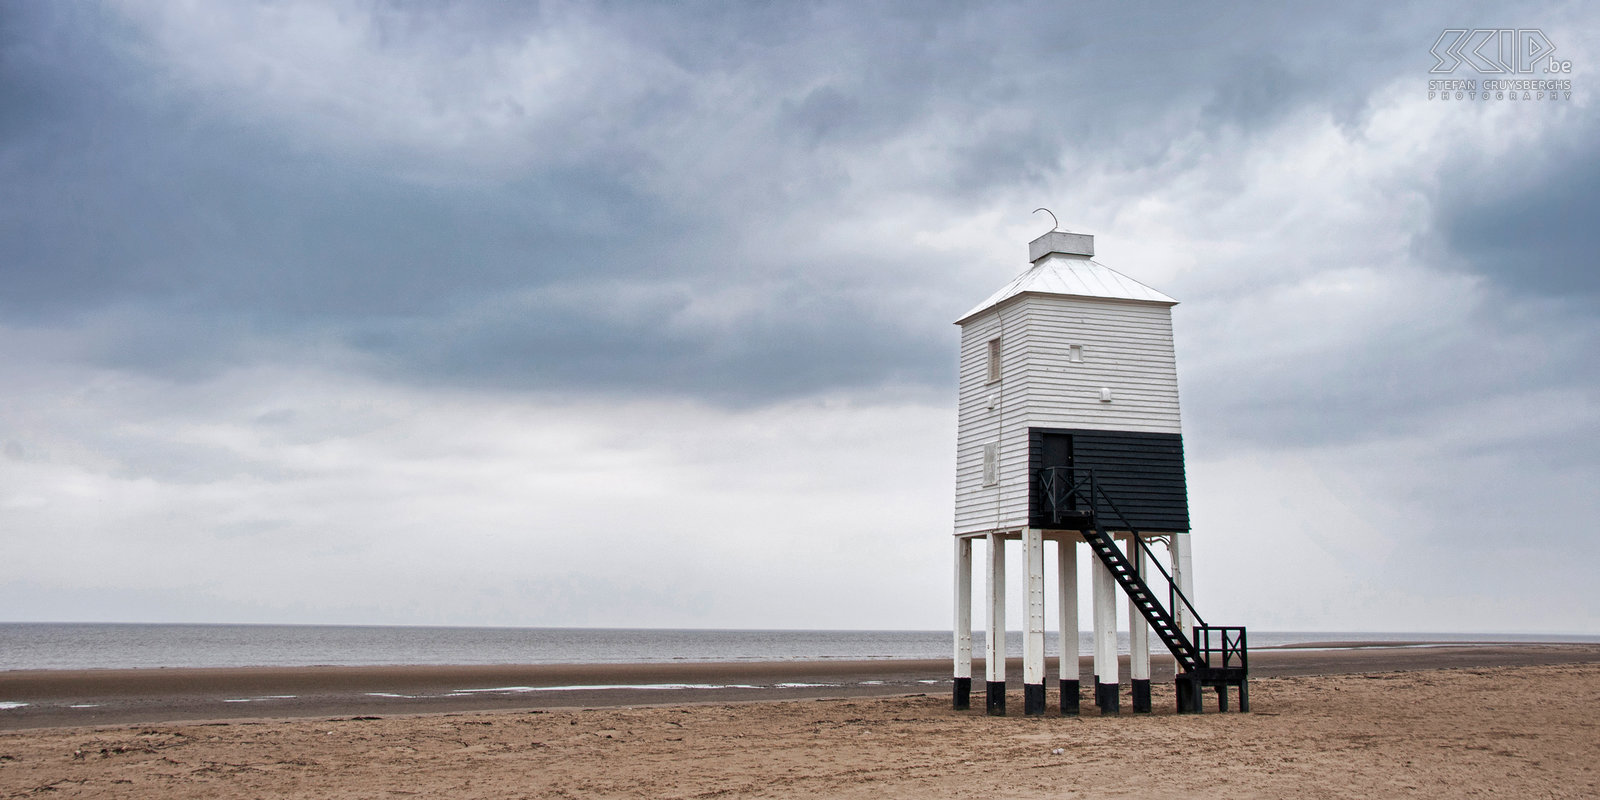 Burnham Lighthouse The Burnham-on-Sea Low lighthouse is a wooden lighthouse which stands on nine wooden piers. Stefan Cruysberghs